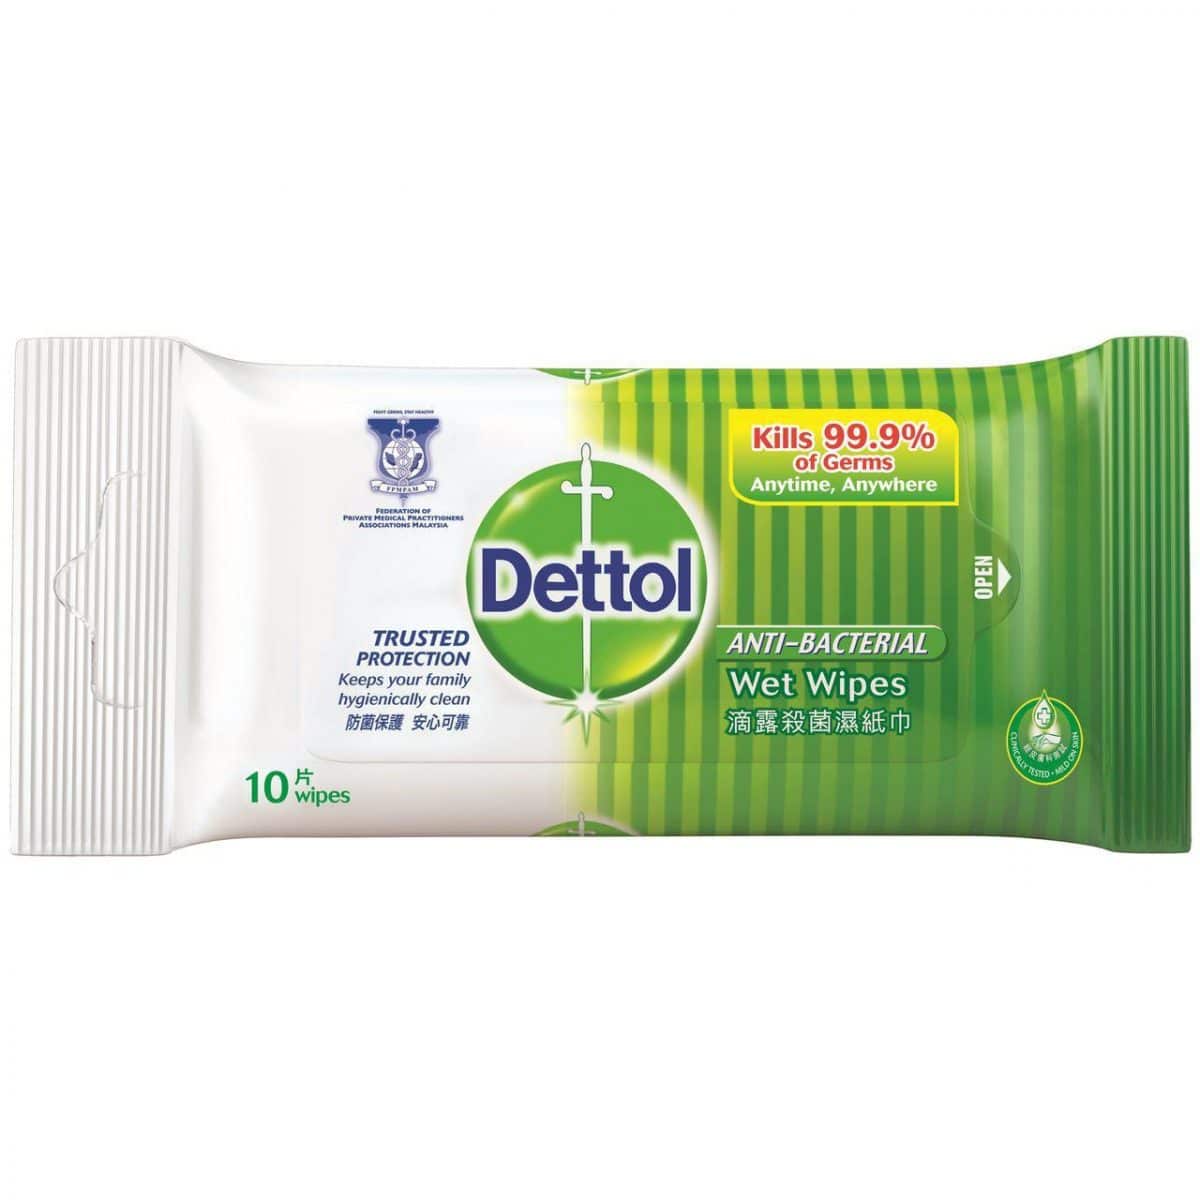 Dettol Anti-Bacterial Wet Wipes disinfectant